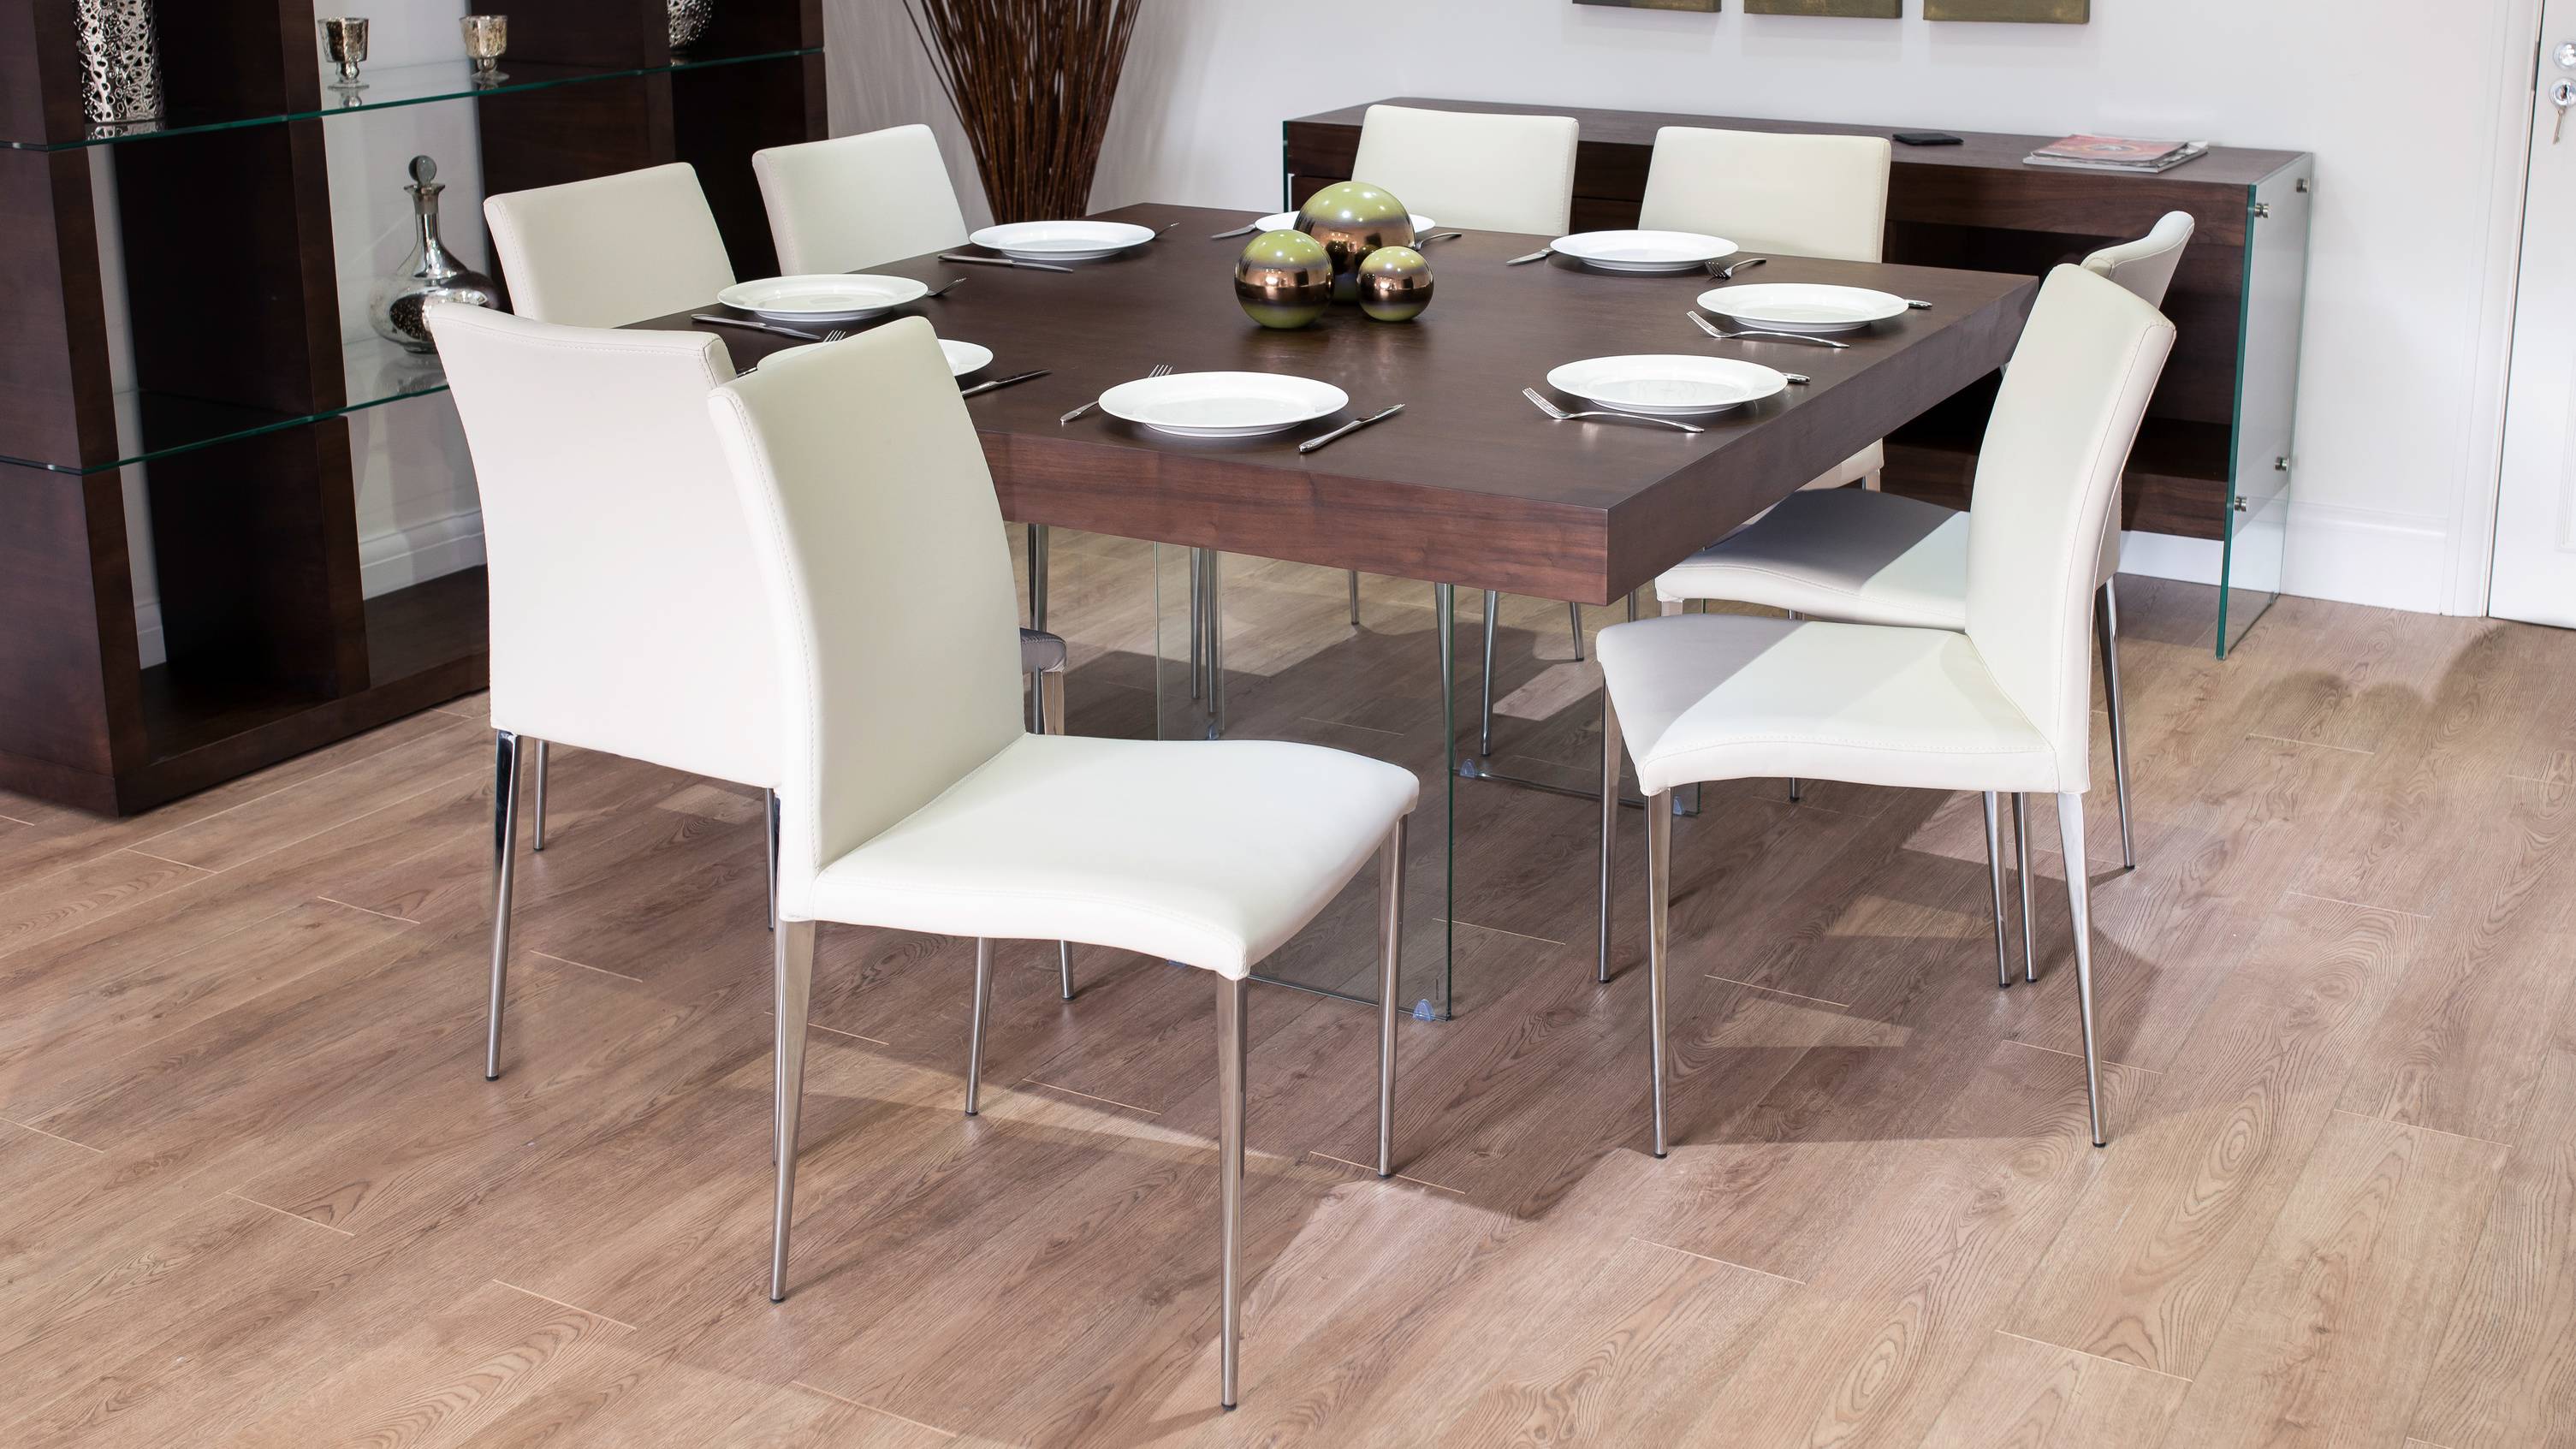 Large Square Dining Table with Modern Chairs